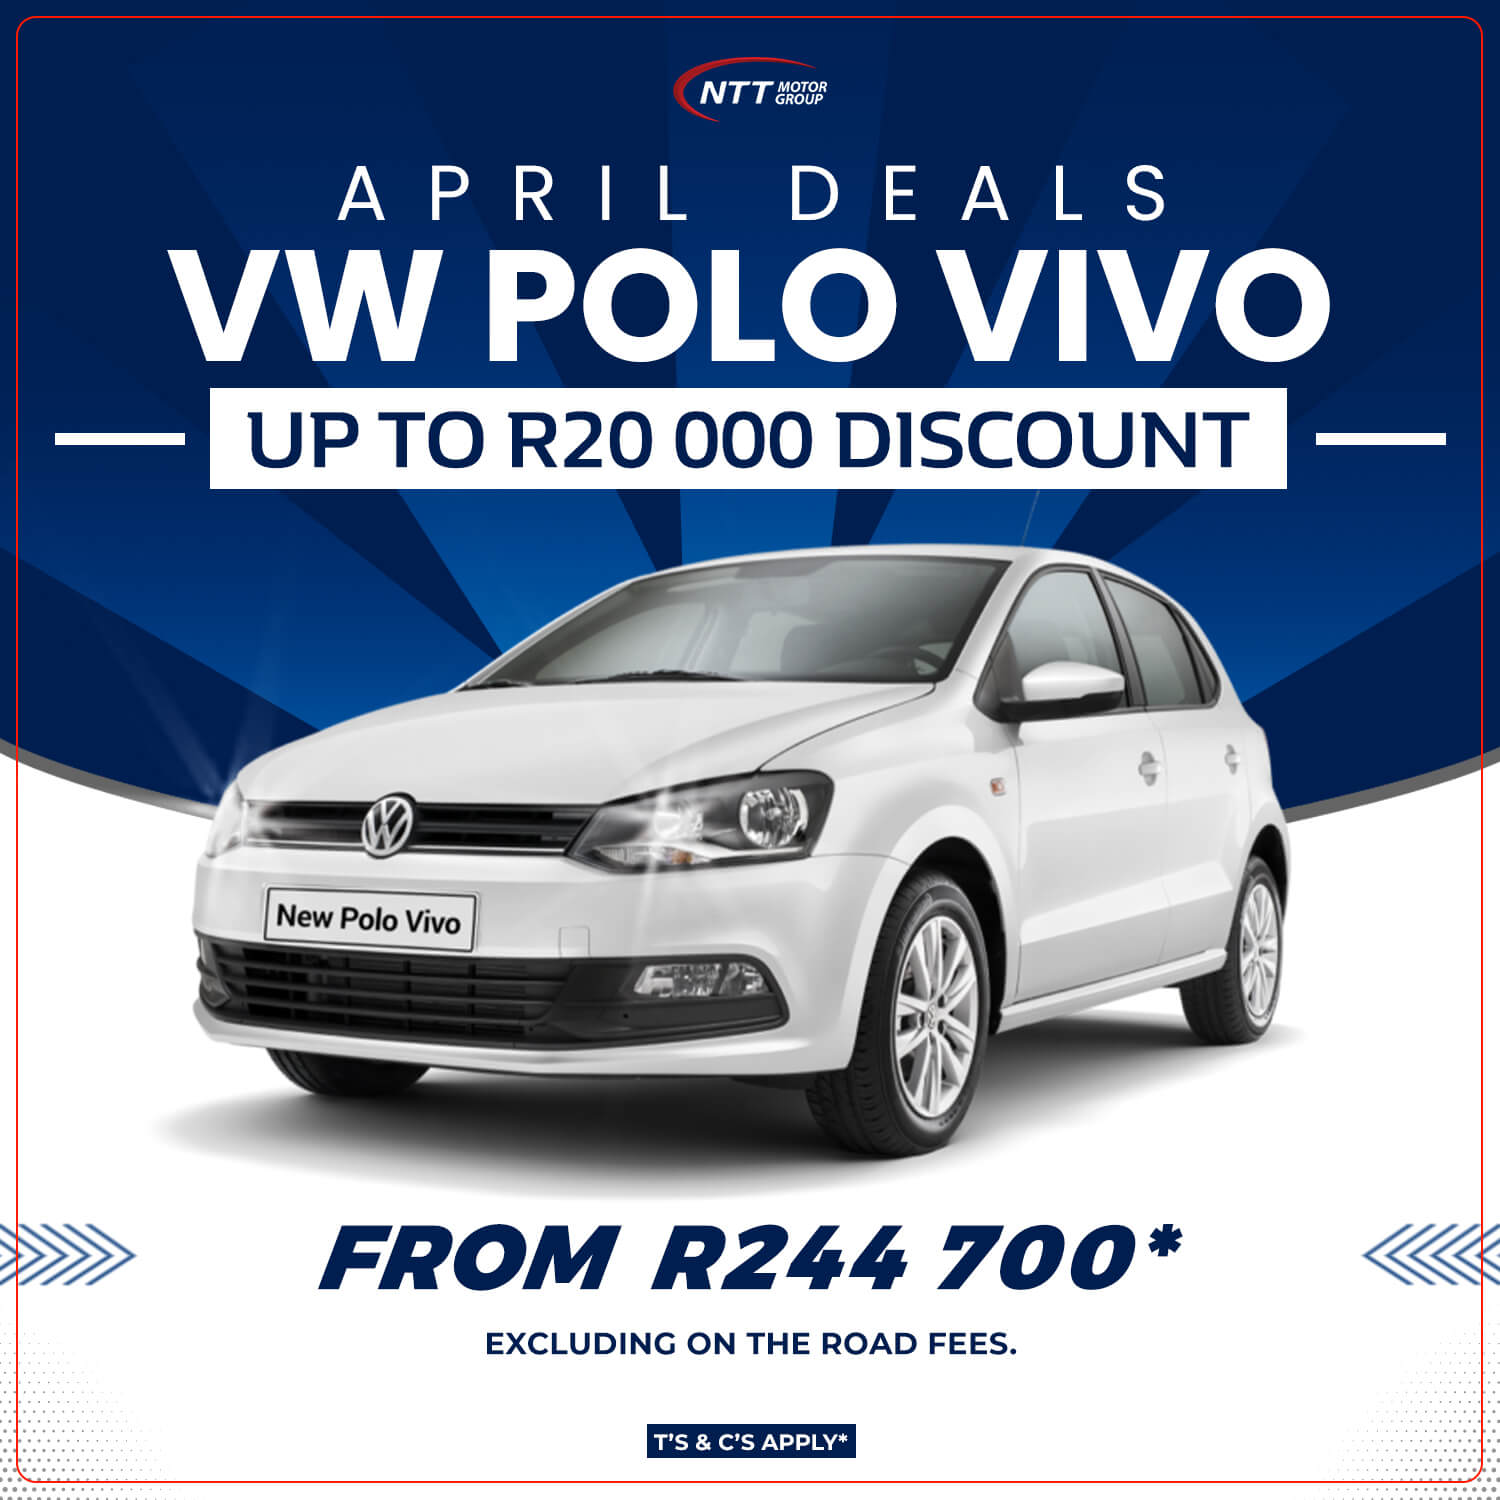 VW POLO VIVO - NTT Motor Group - Cars for Sale in South Africa